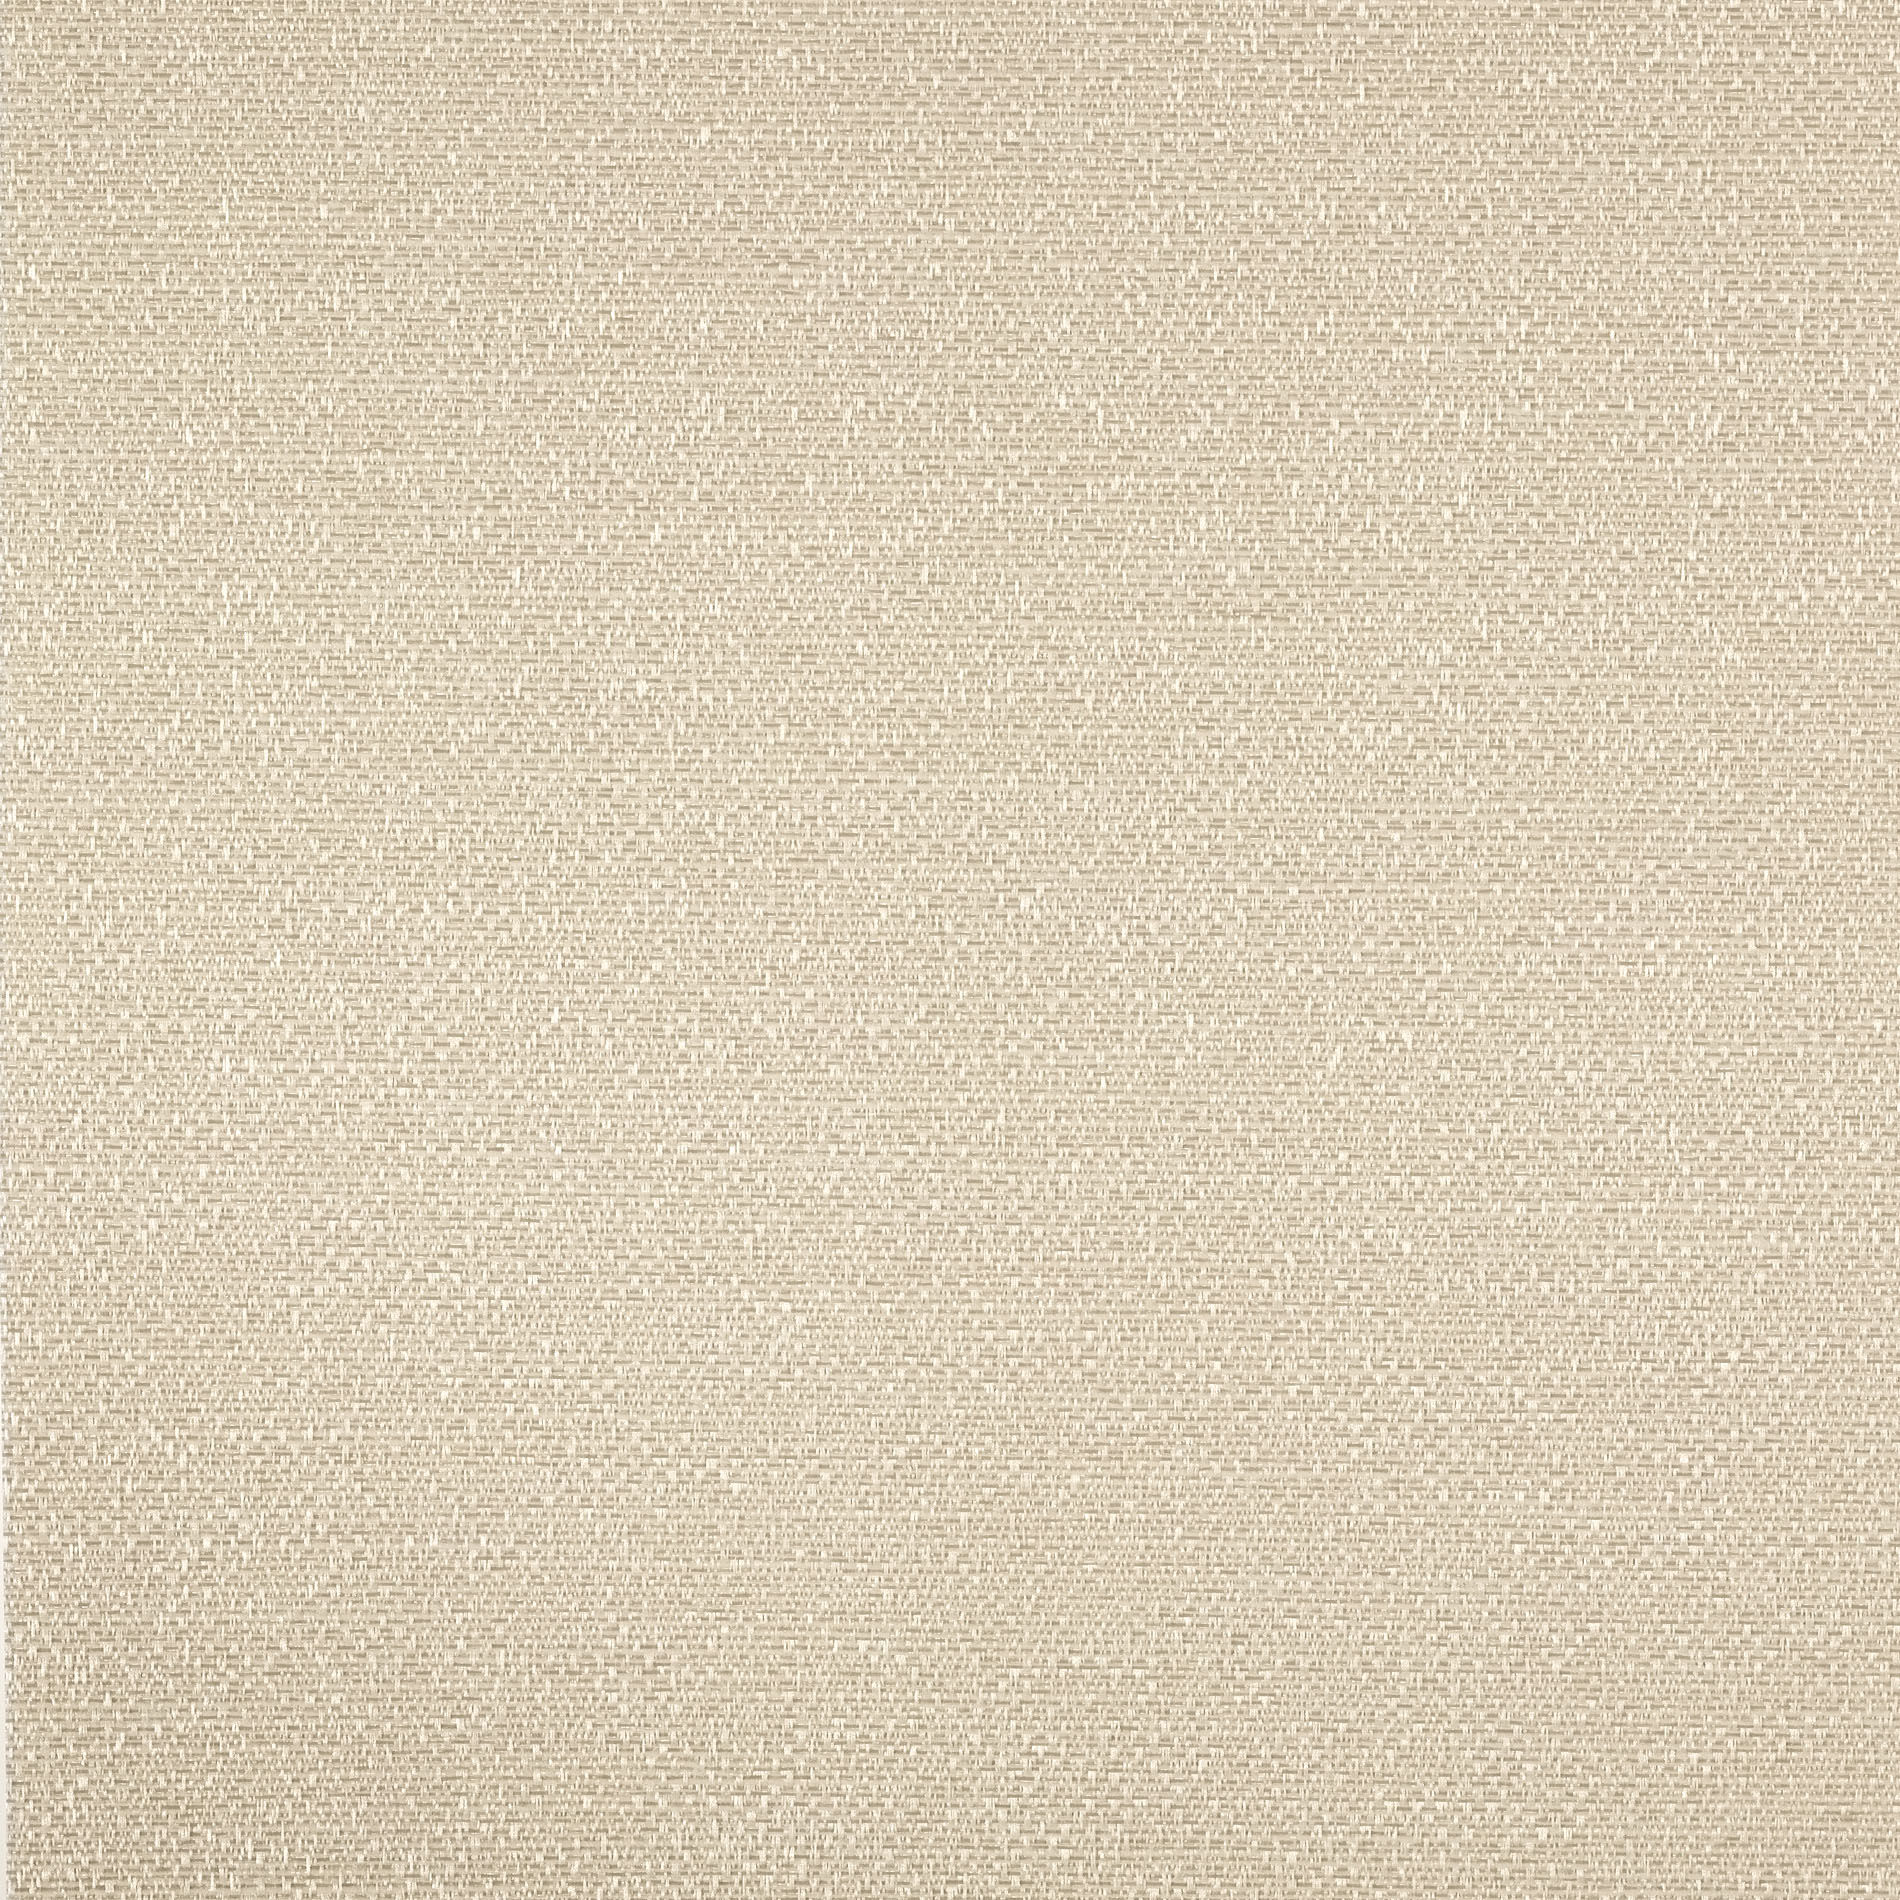 Altex - Fabric - BROOME II OPAQUE - Parchment - 14BR33418